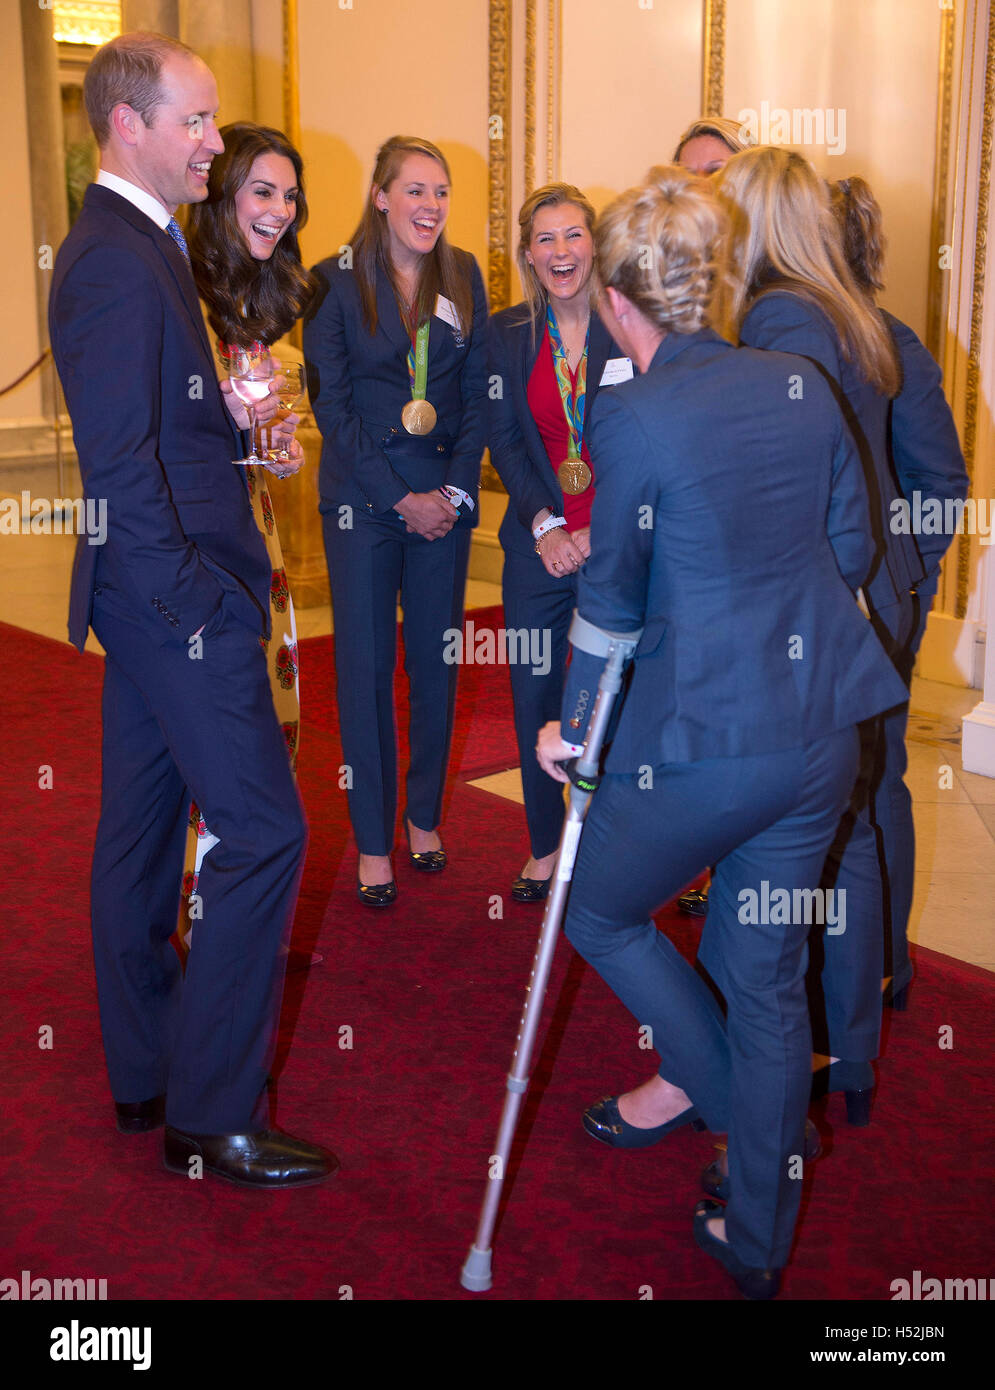 The Duke and Duchess of Cambridge meet the ladies Hockey Team with Susannah Townsend on crutches during a reception for Team GB and ParalympicsGB medallists from the 2016 Olympic and Paralympic Games at Buckingham Palace in London. Stock Photo